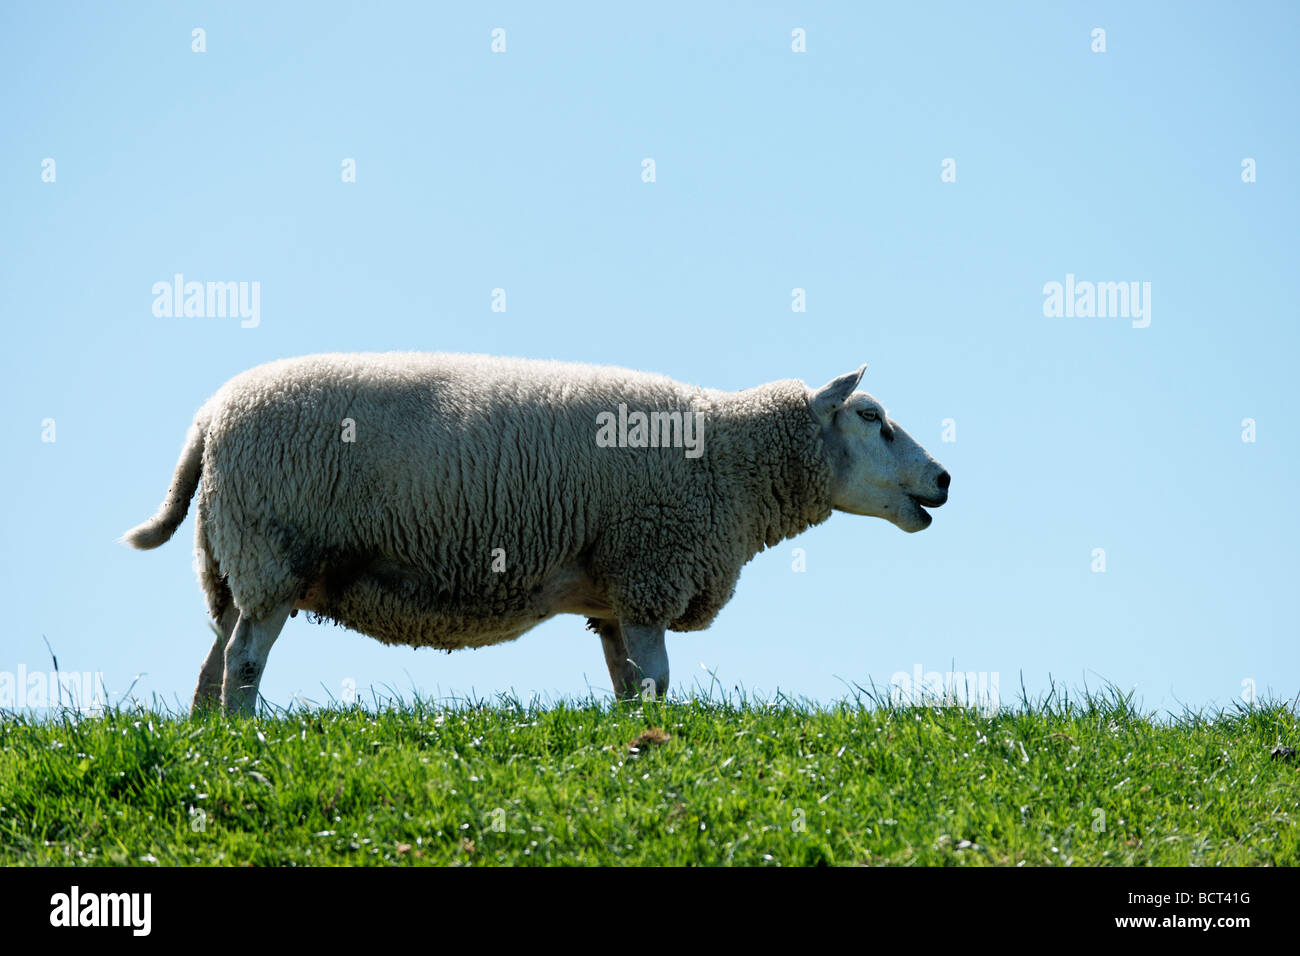 Texel sheep standing on a dyke, Netherlands. Stock Photo